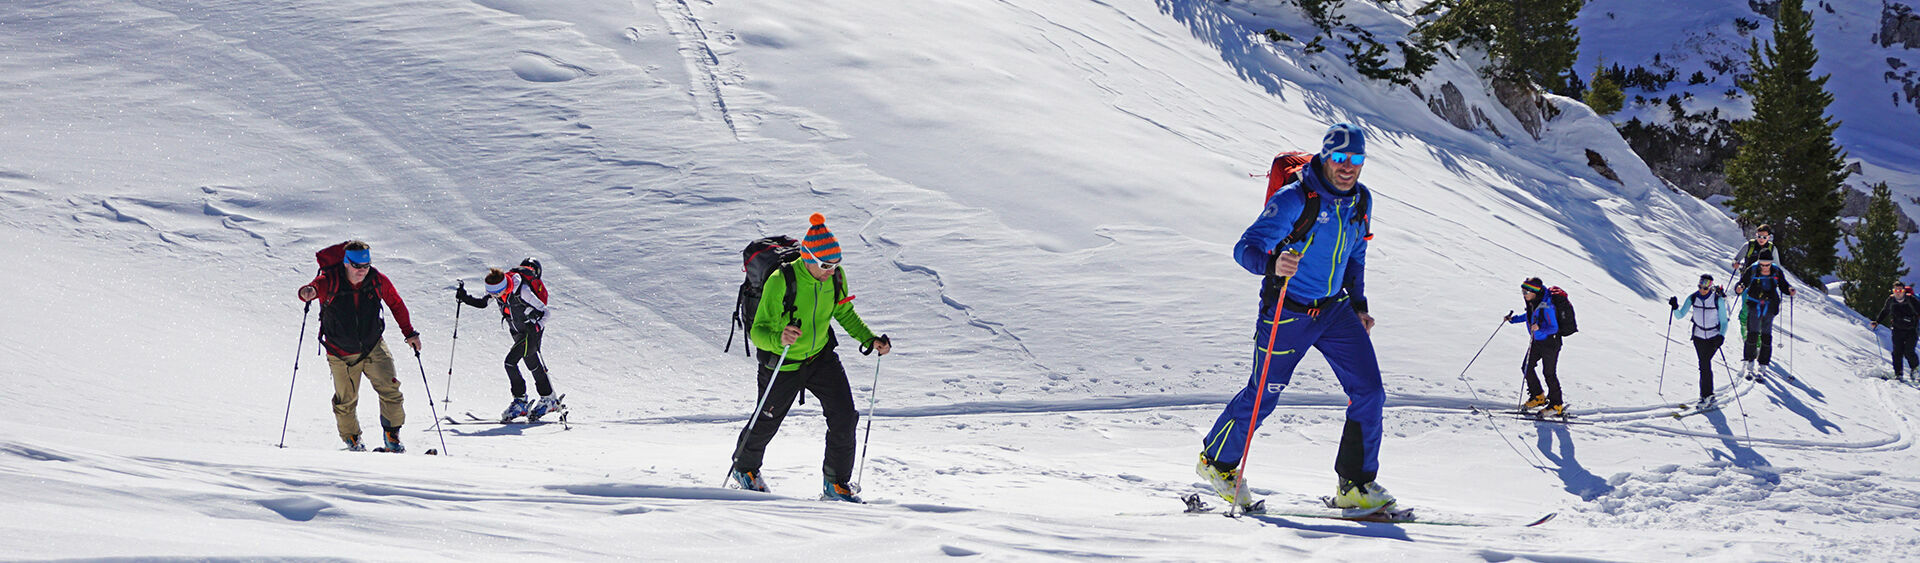 A ski tour in the middle of the winter landscape of the Rofan mountains is a special experience.